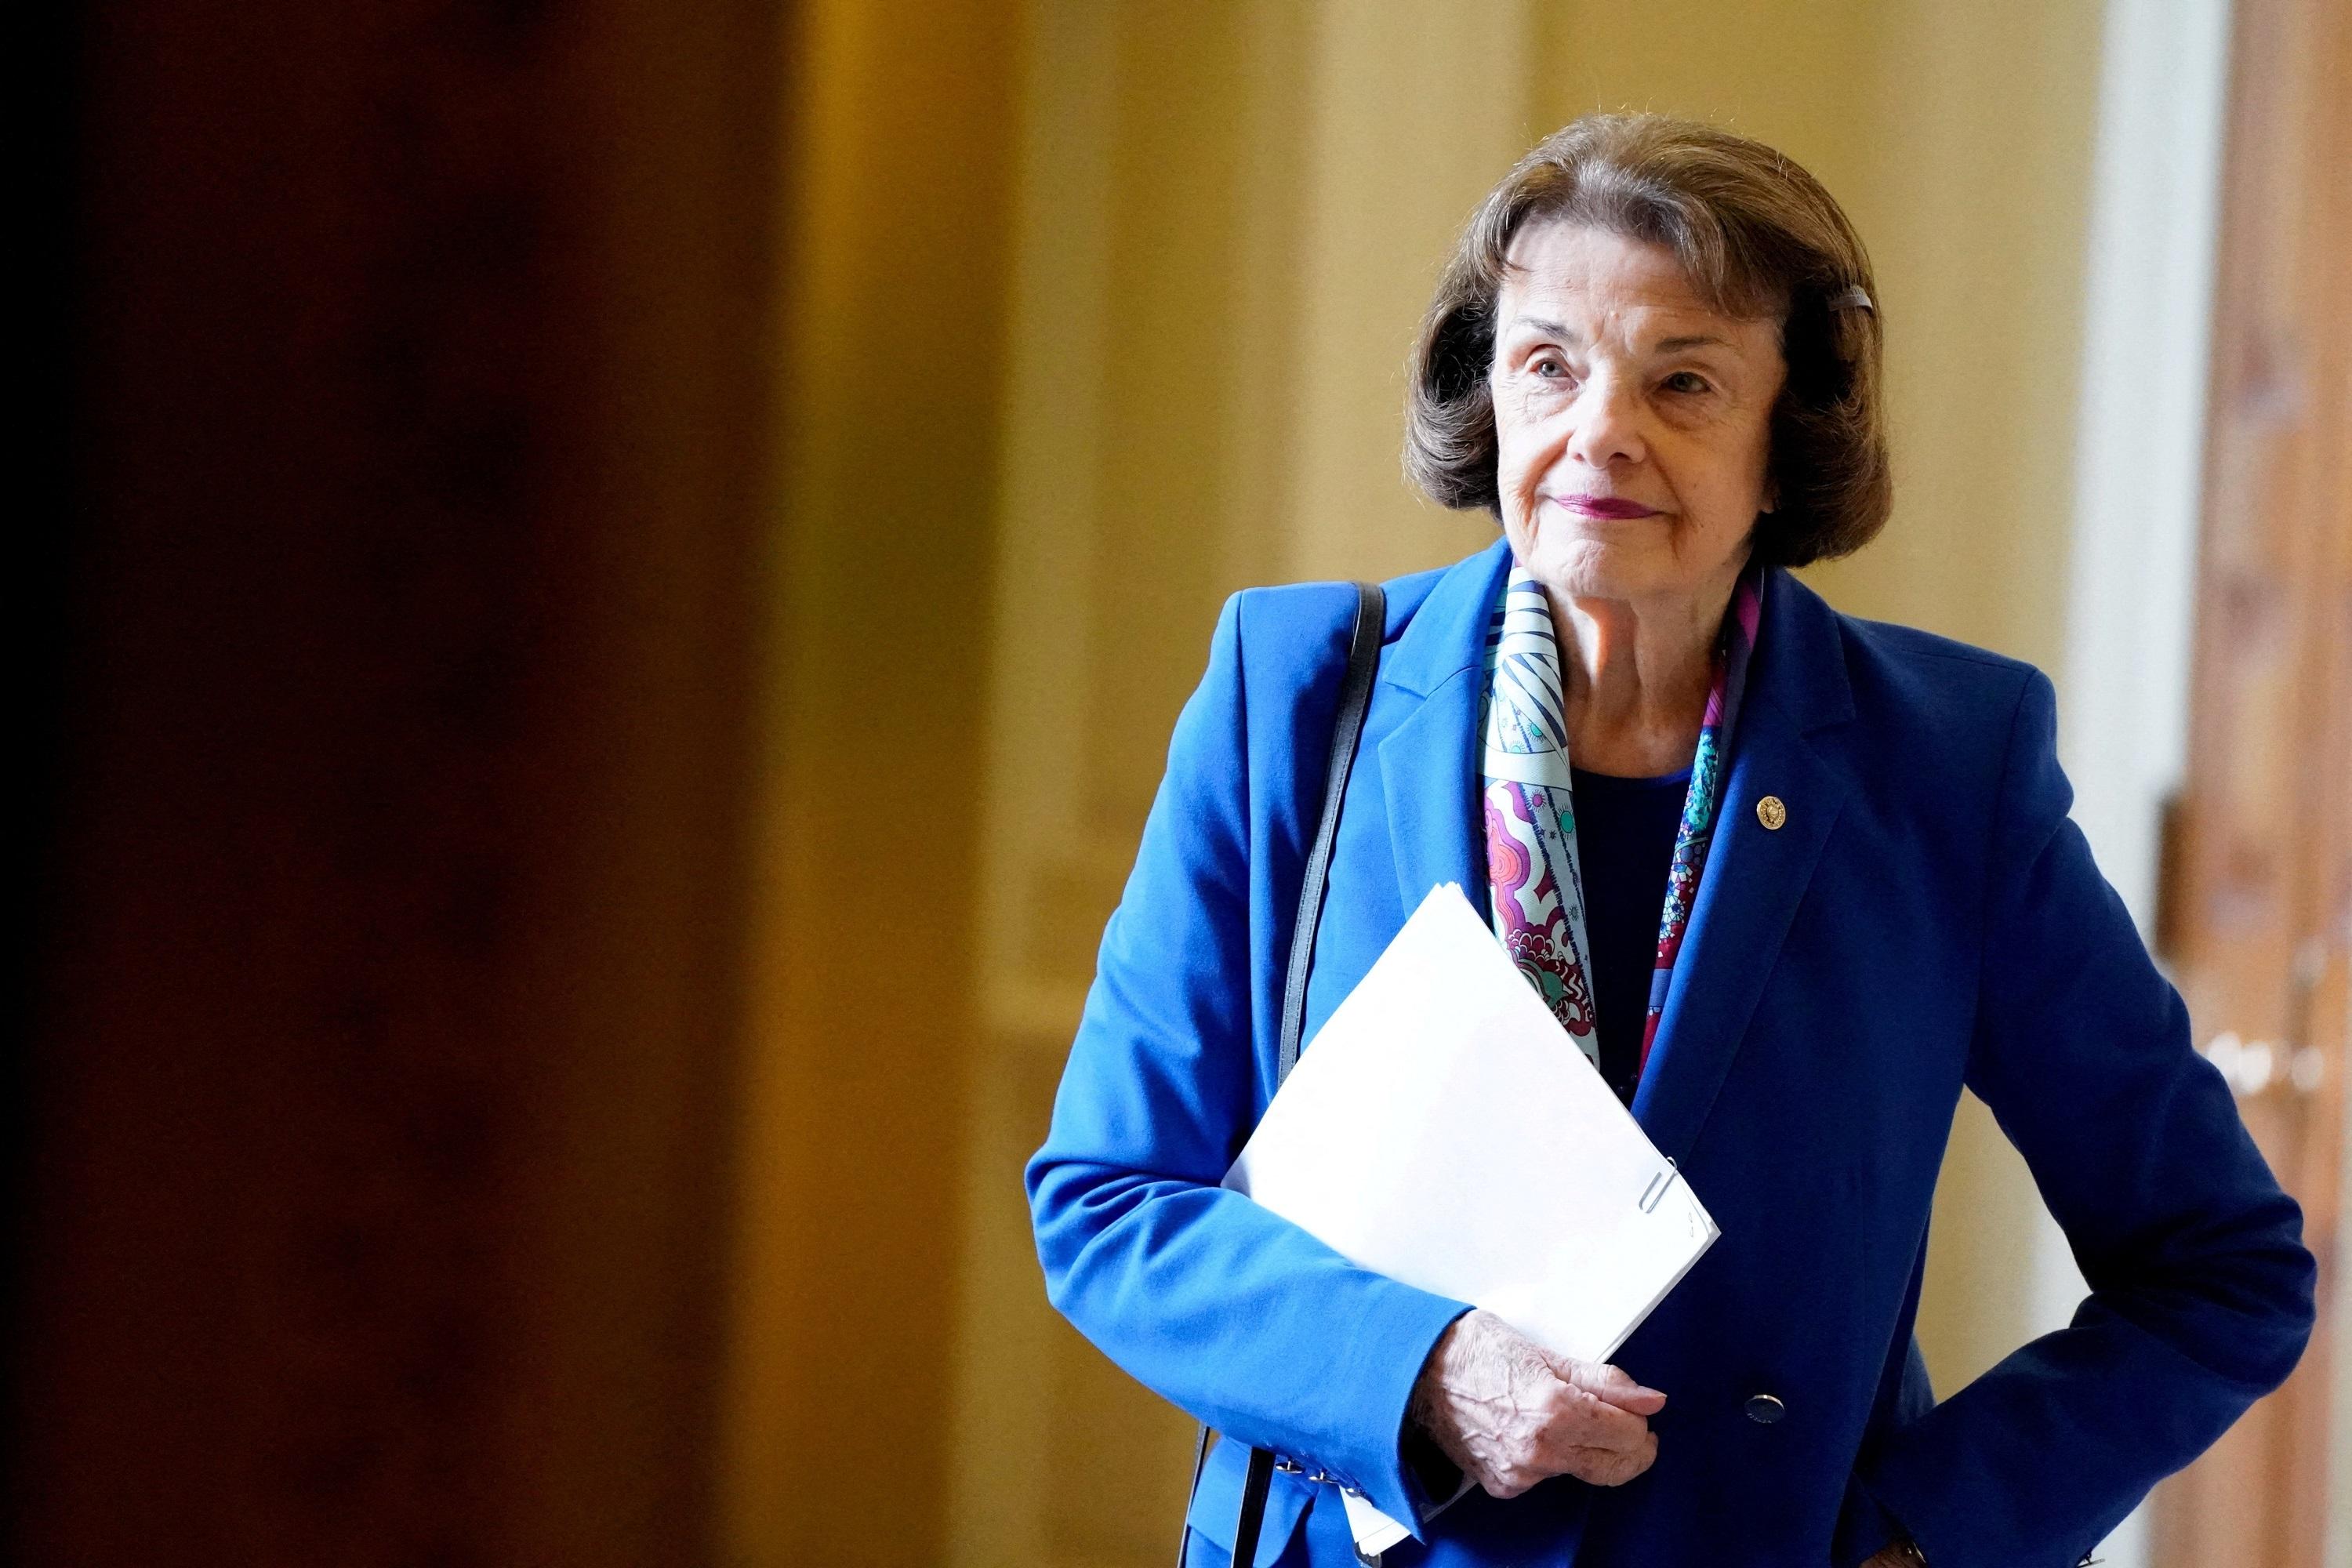 California Leaders React to Sen. Feinstein’s Death, Next Steps Contemplated